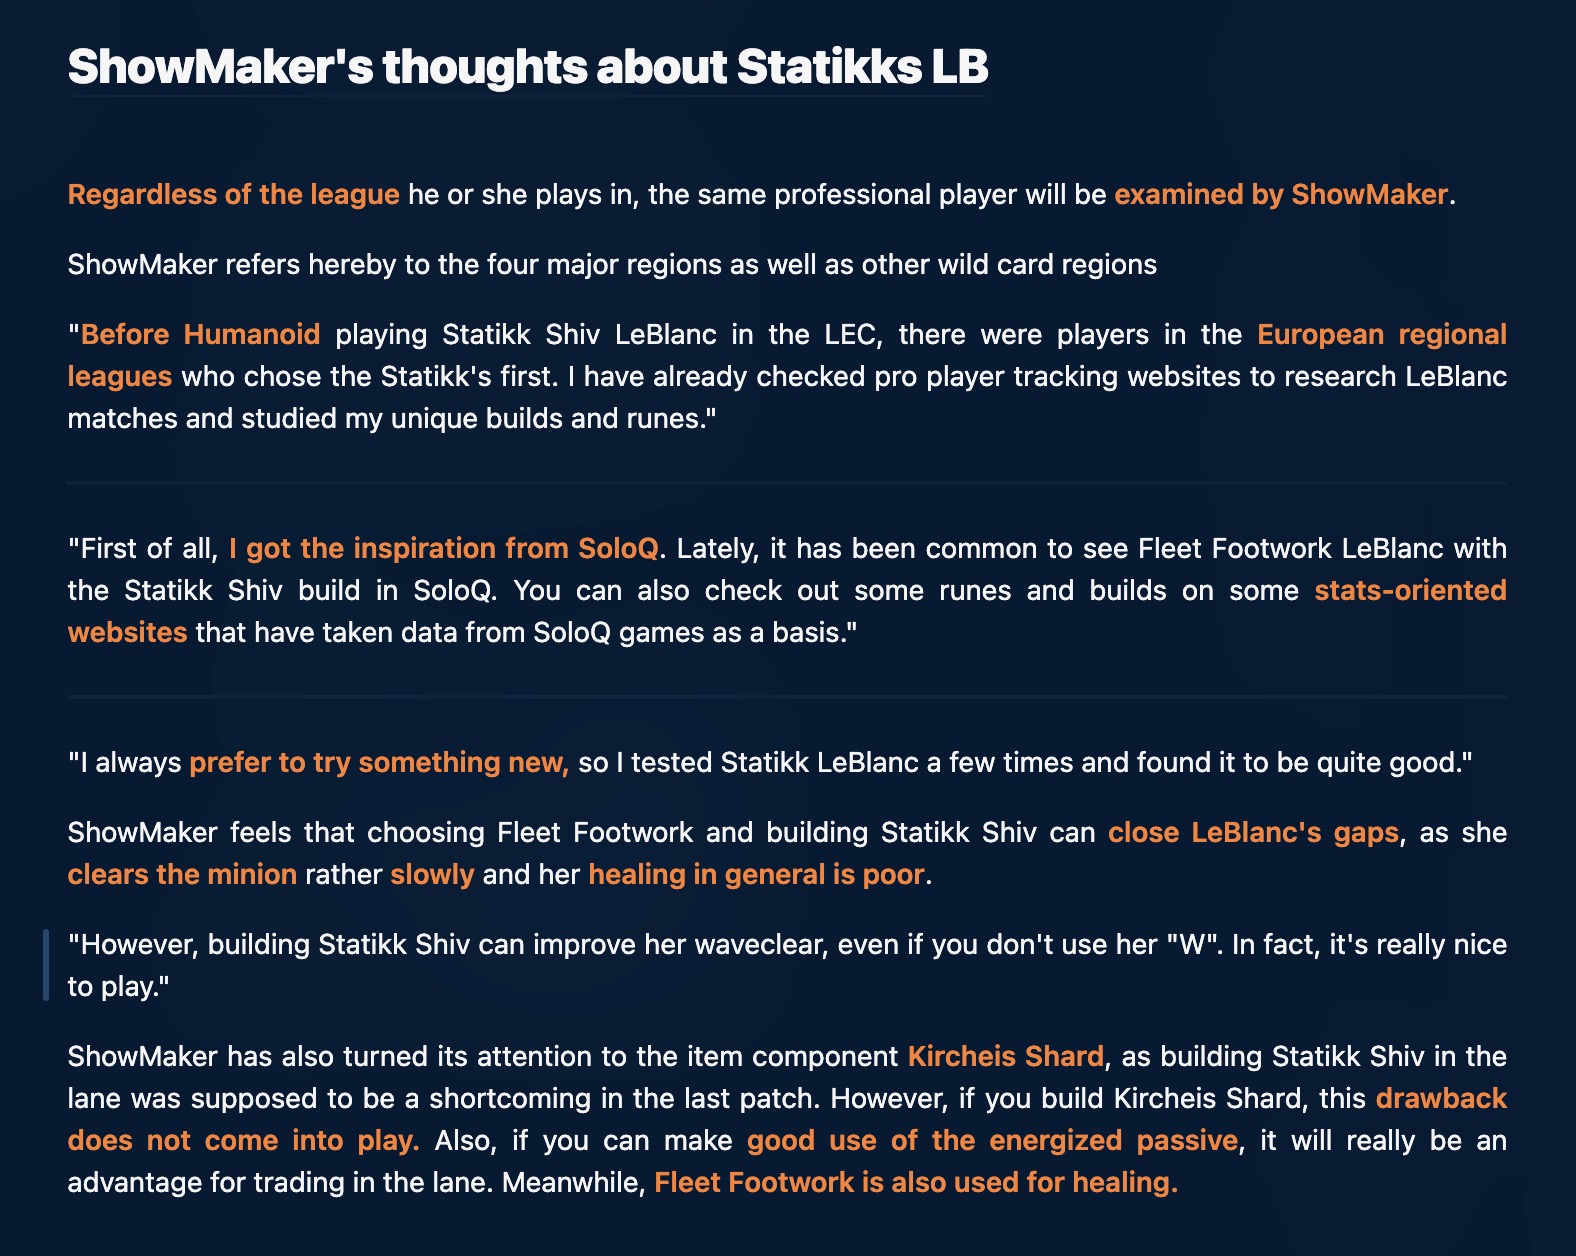 Rita on X: ShowMaker's thoughts about the new Statikk LB